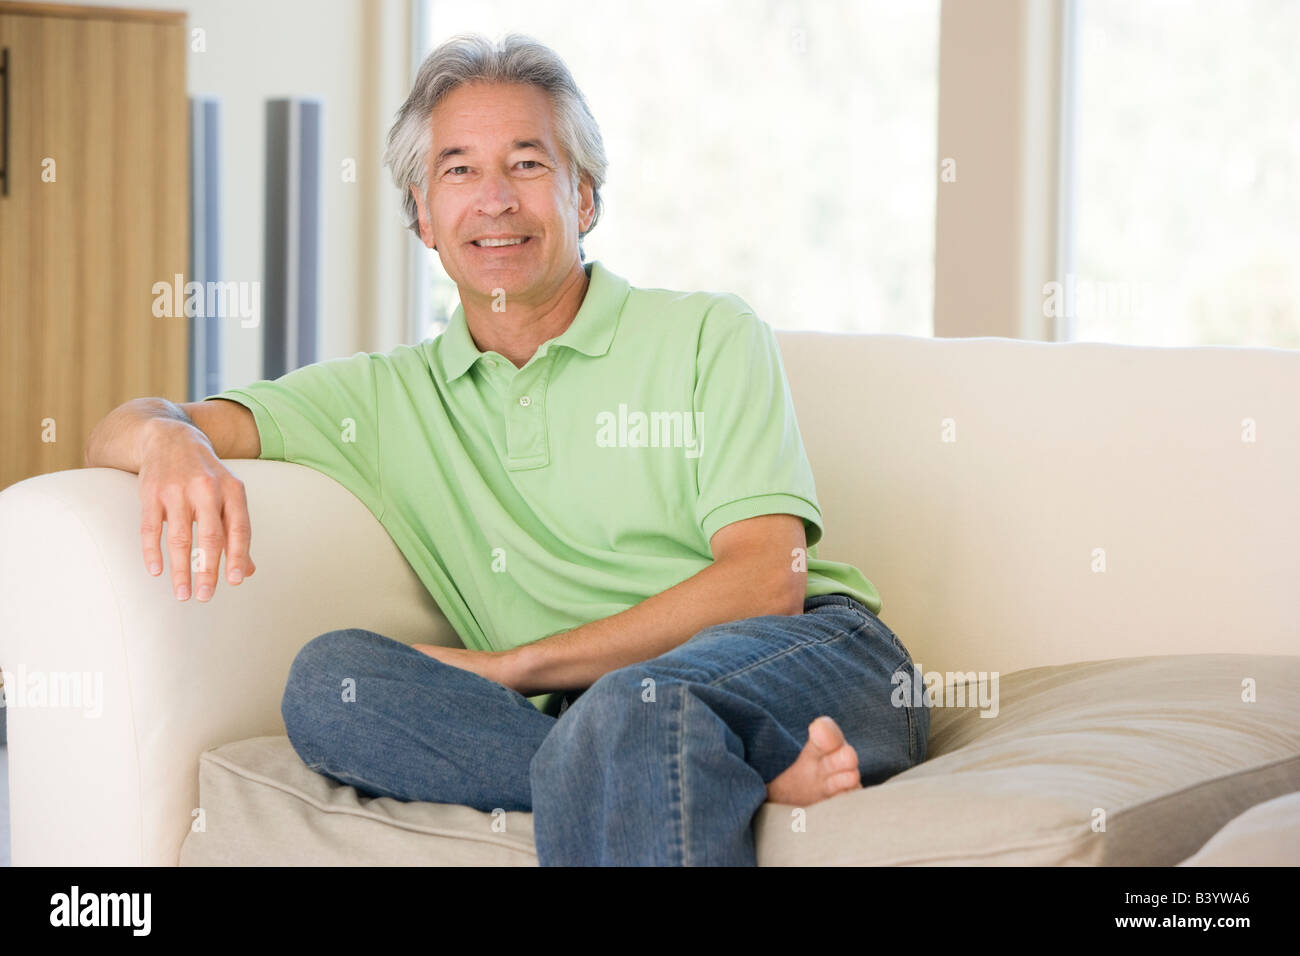 Man sitting in living room smiling Stock Photo